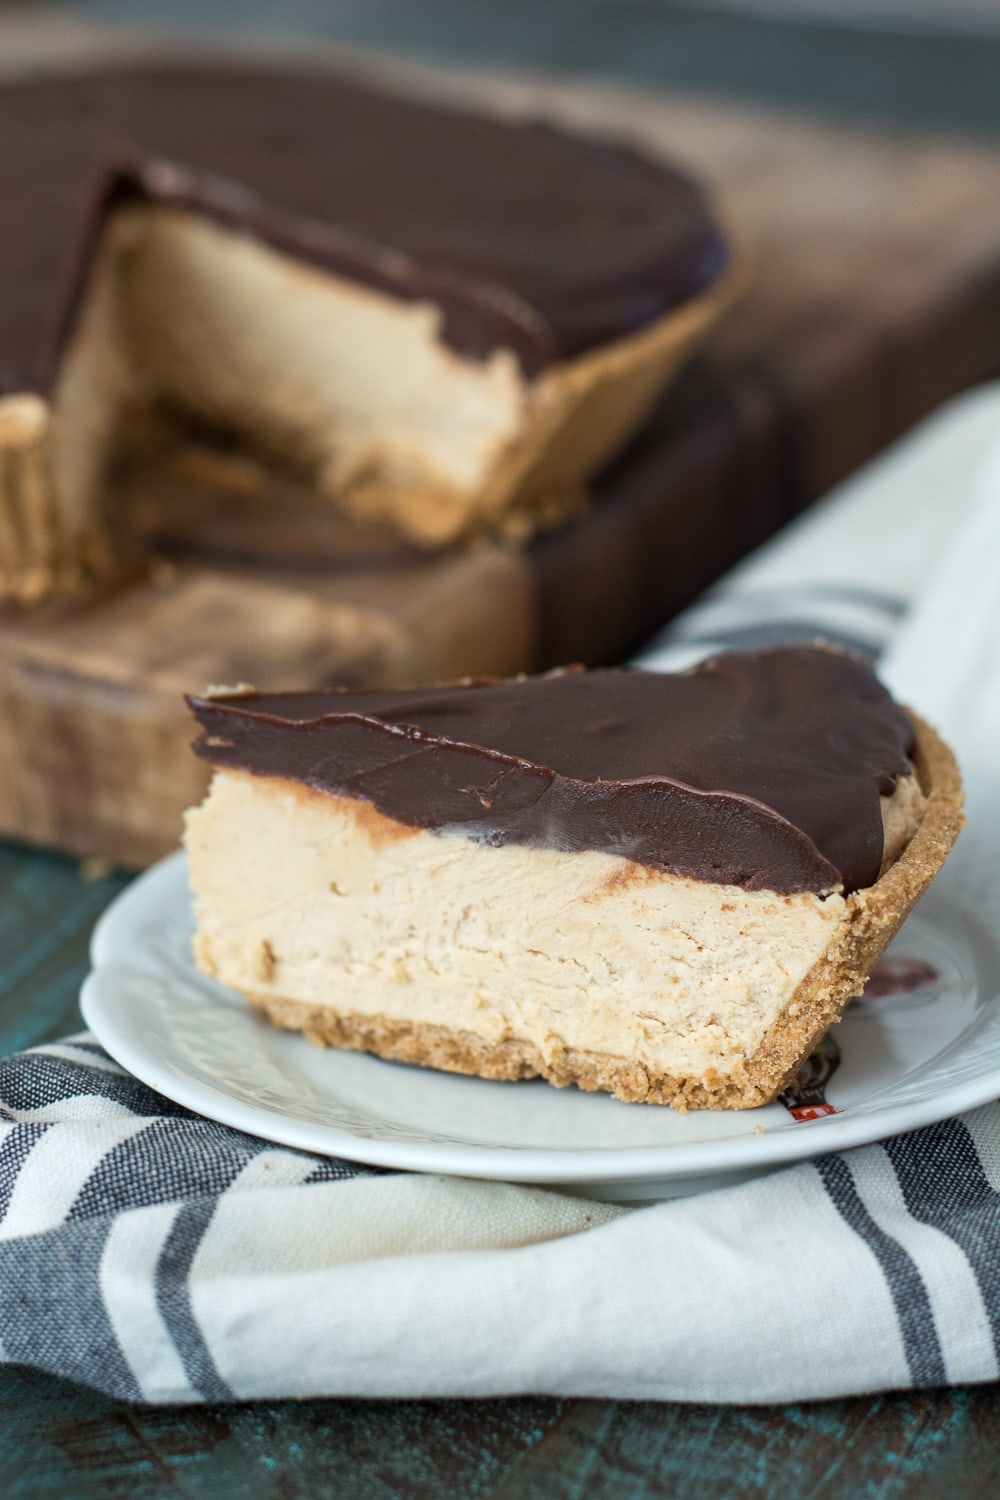 Creamy Peanut Butter Filling is topped with Dark Chocolate Ganache for the perfect easy and gluten free Peanut Butter Cup Pie